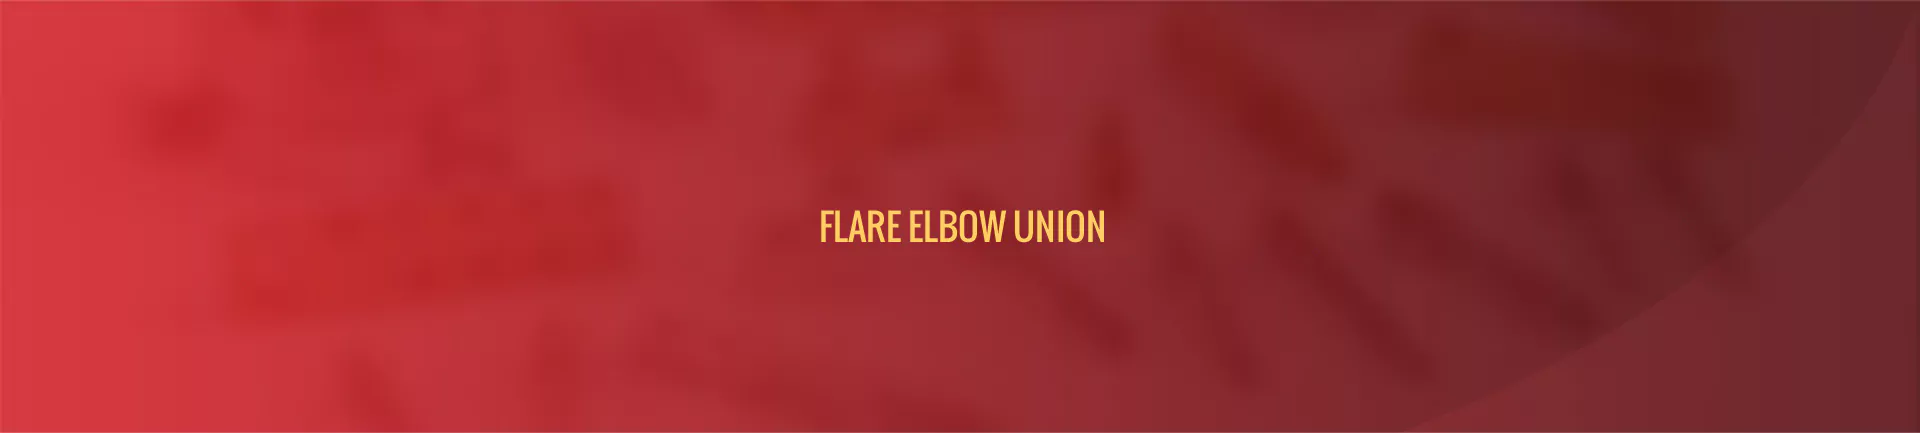 flare_elbow_union-banner